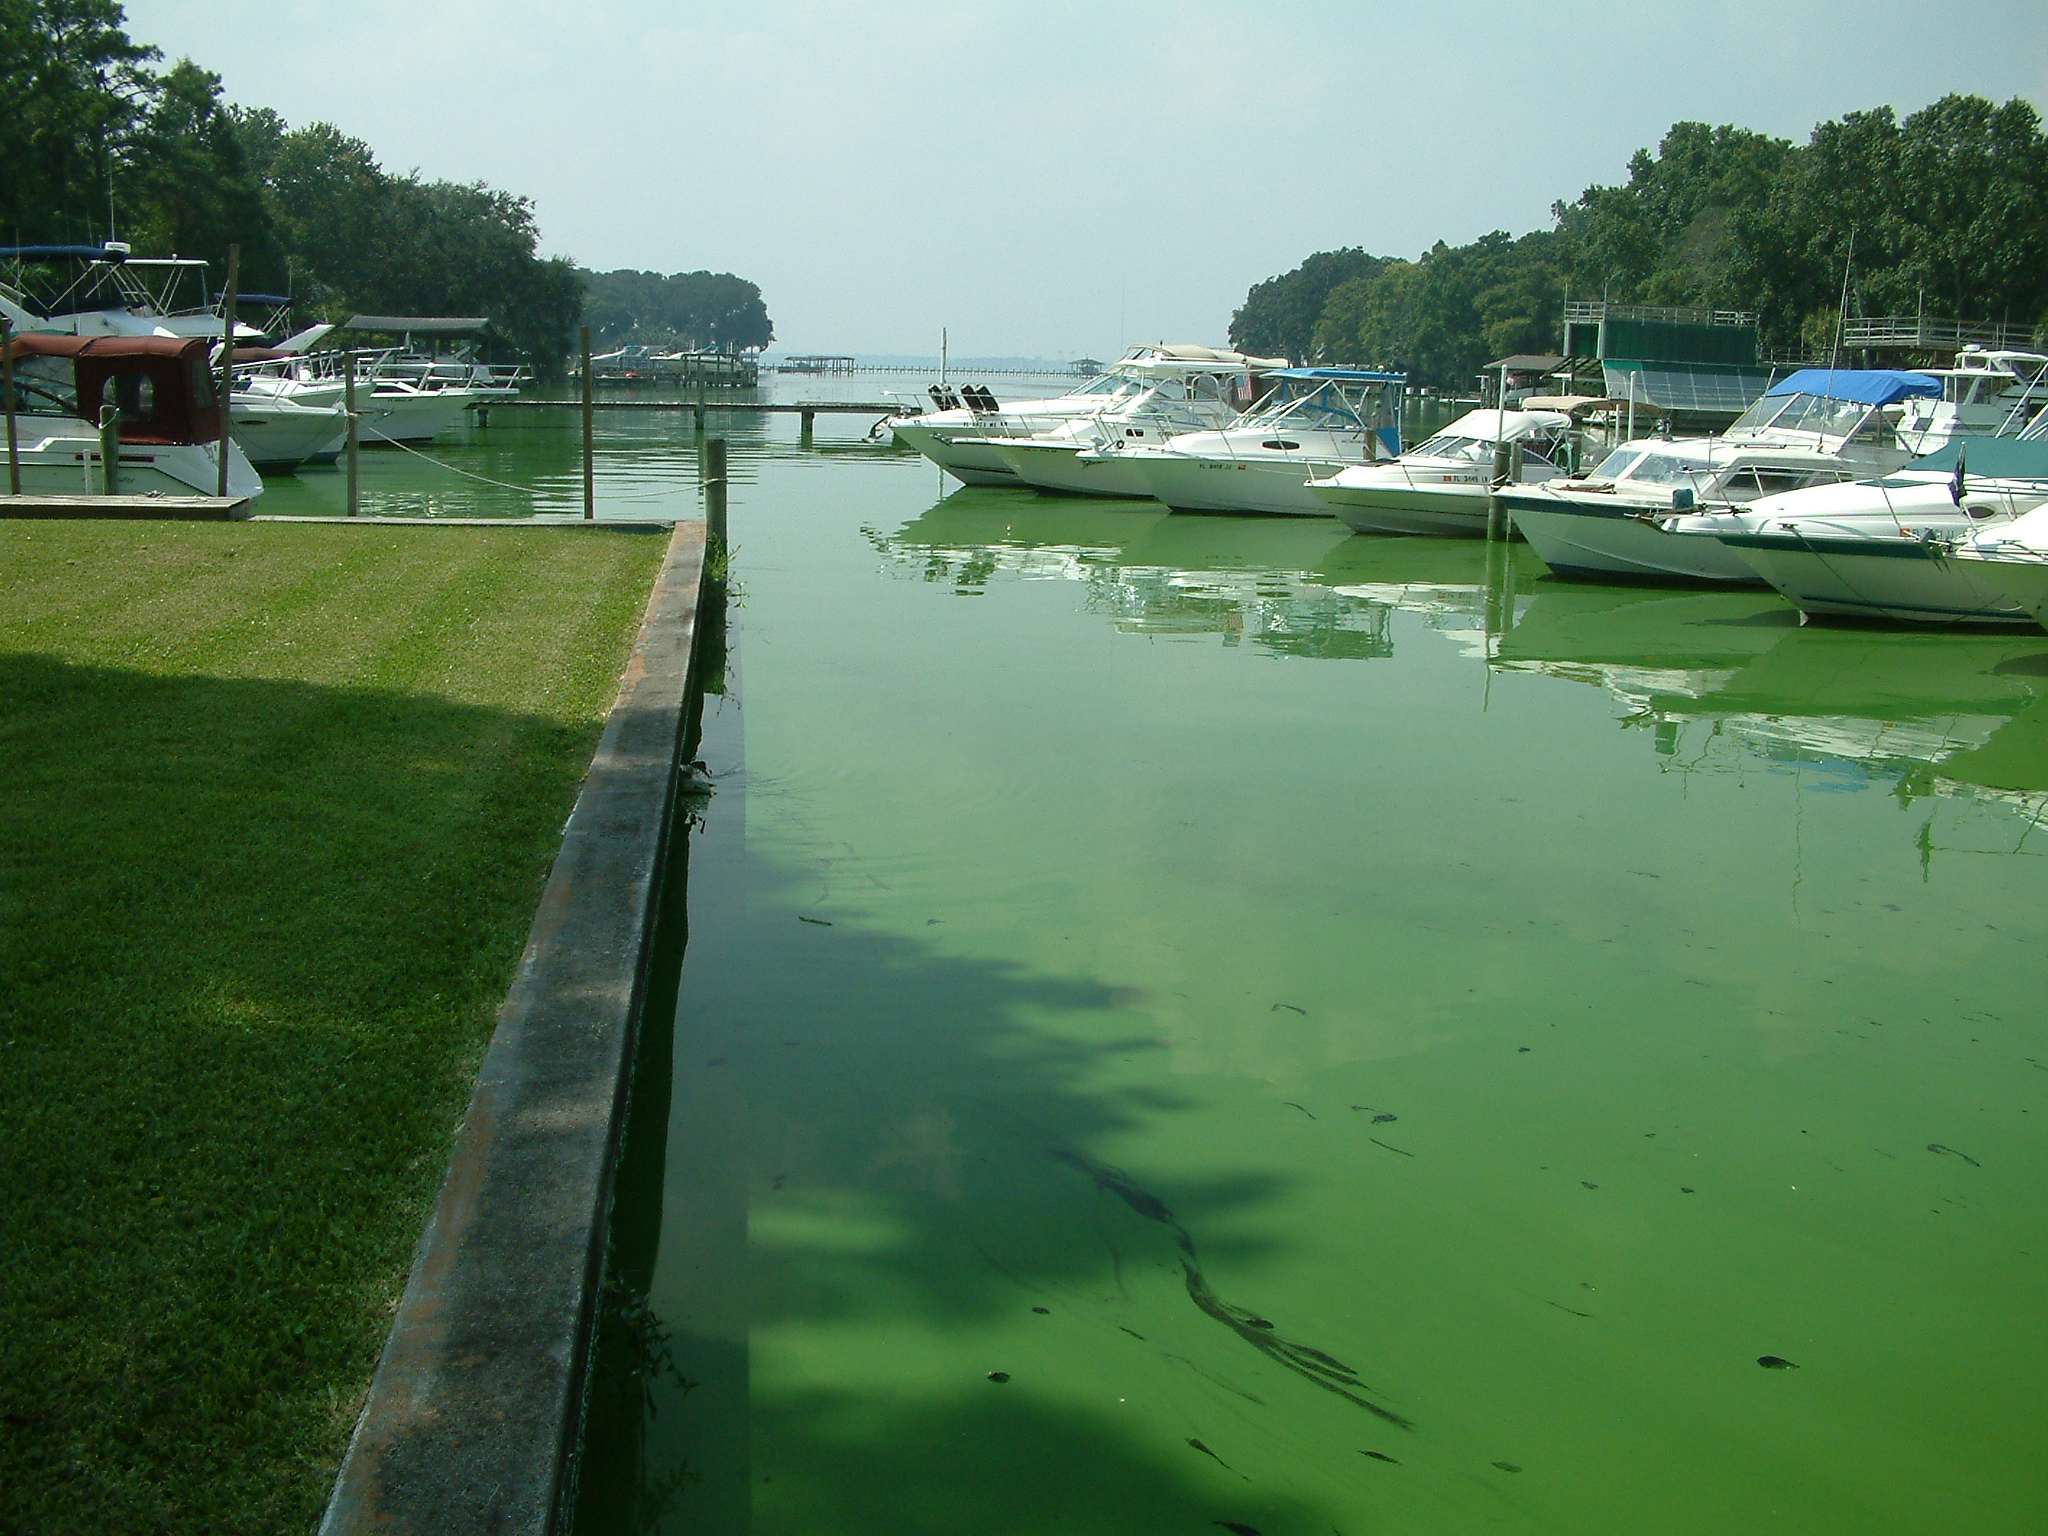 Blue-green Algal bloom observed in marina in Indian River Lagoon